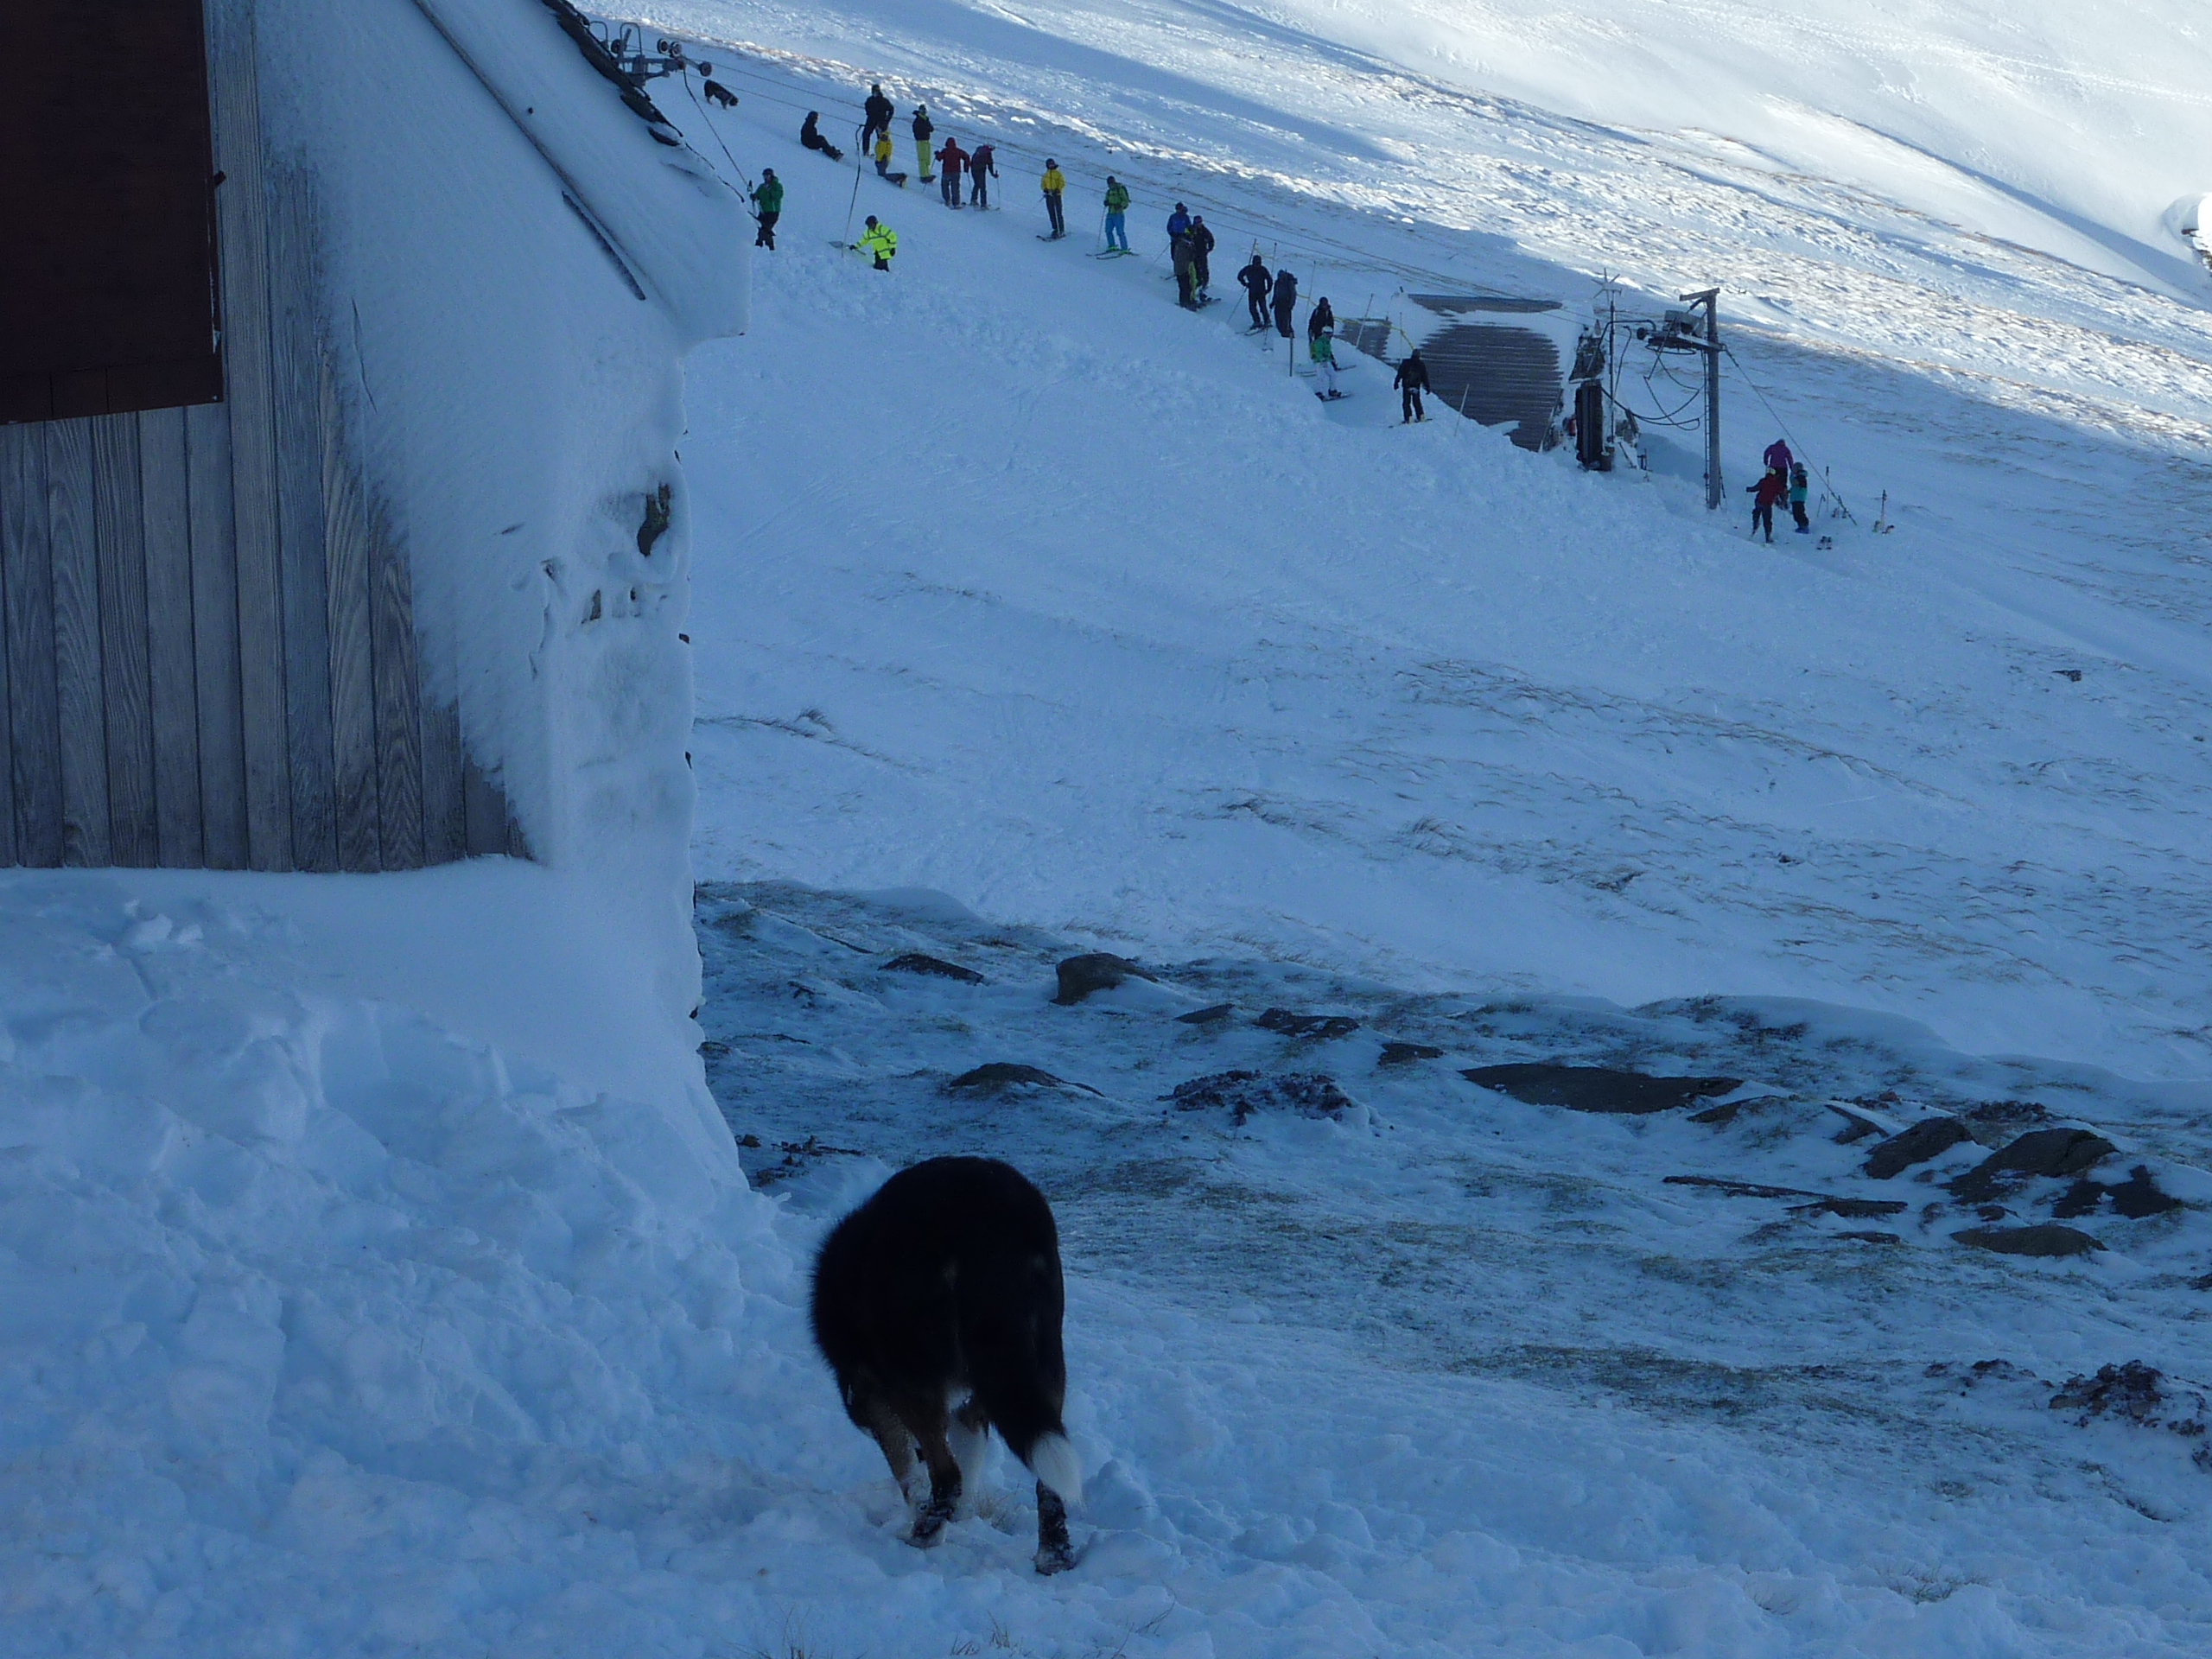 The tow from the Members Hut, Raise (Lake District Ski